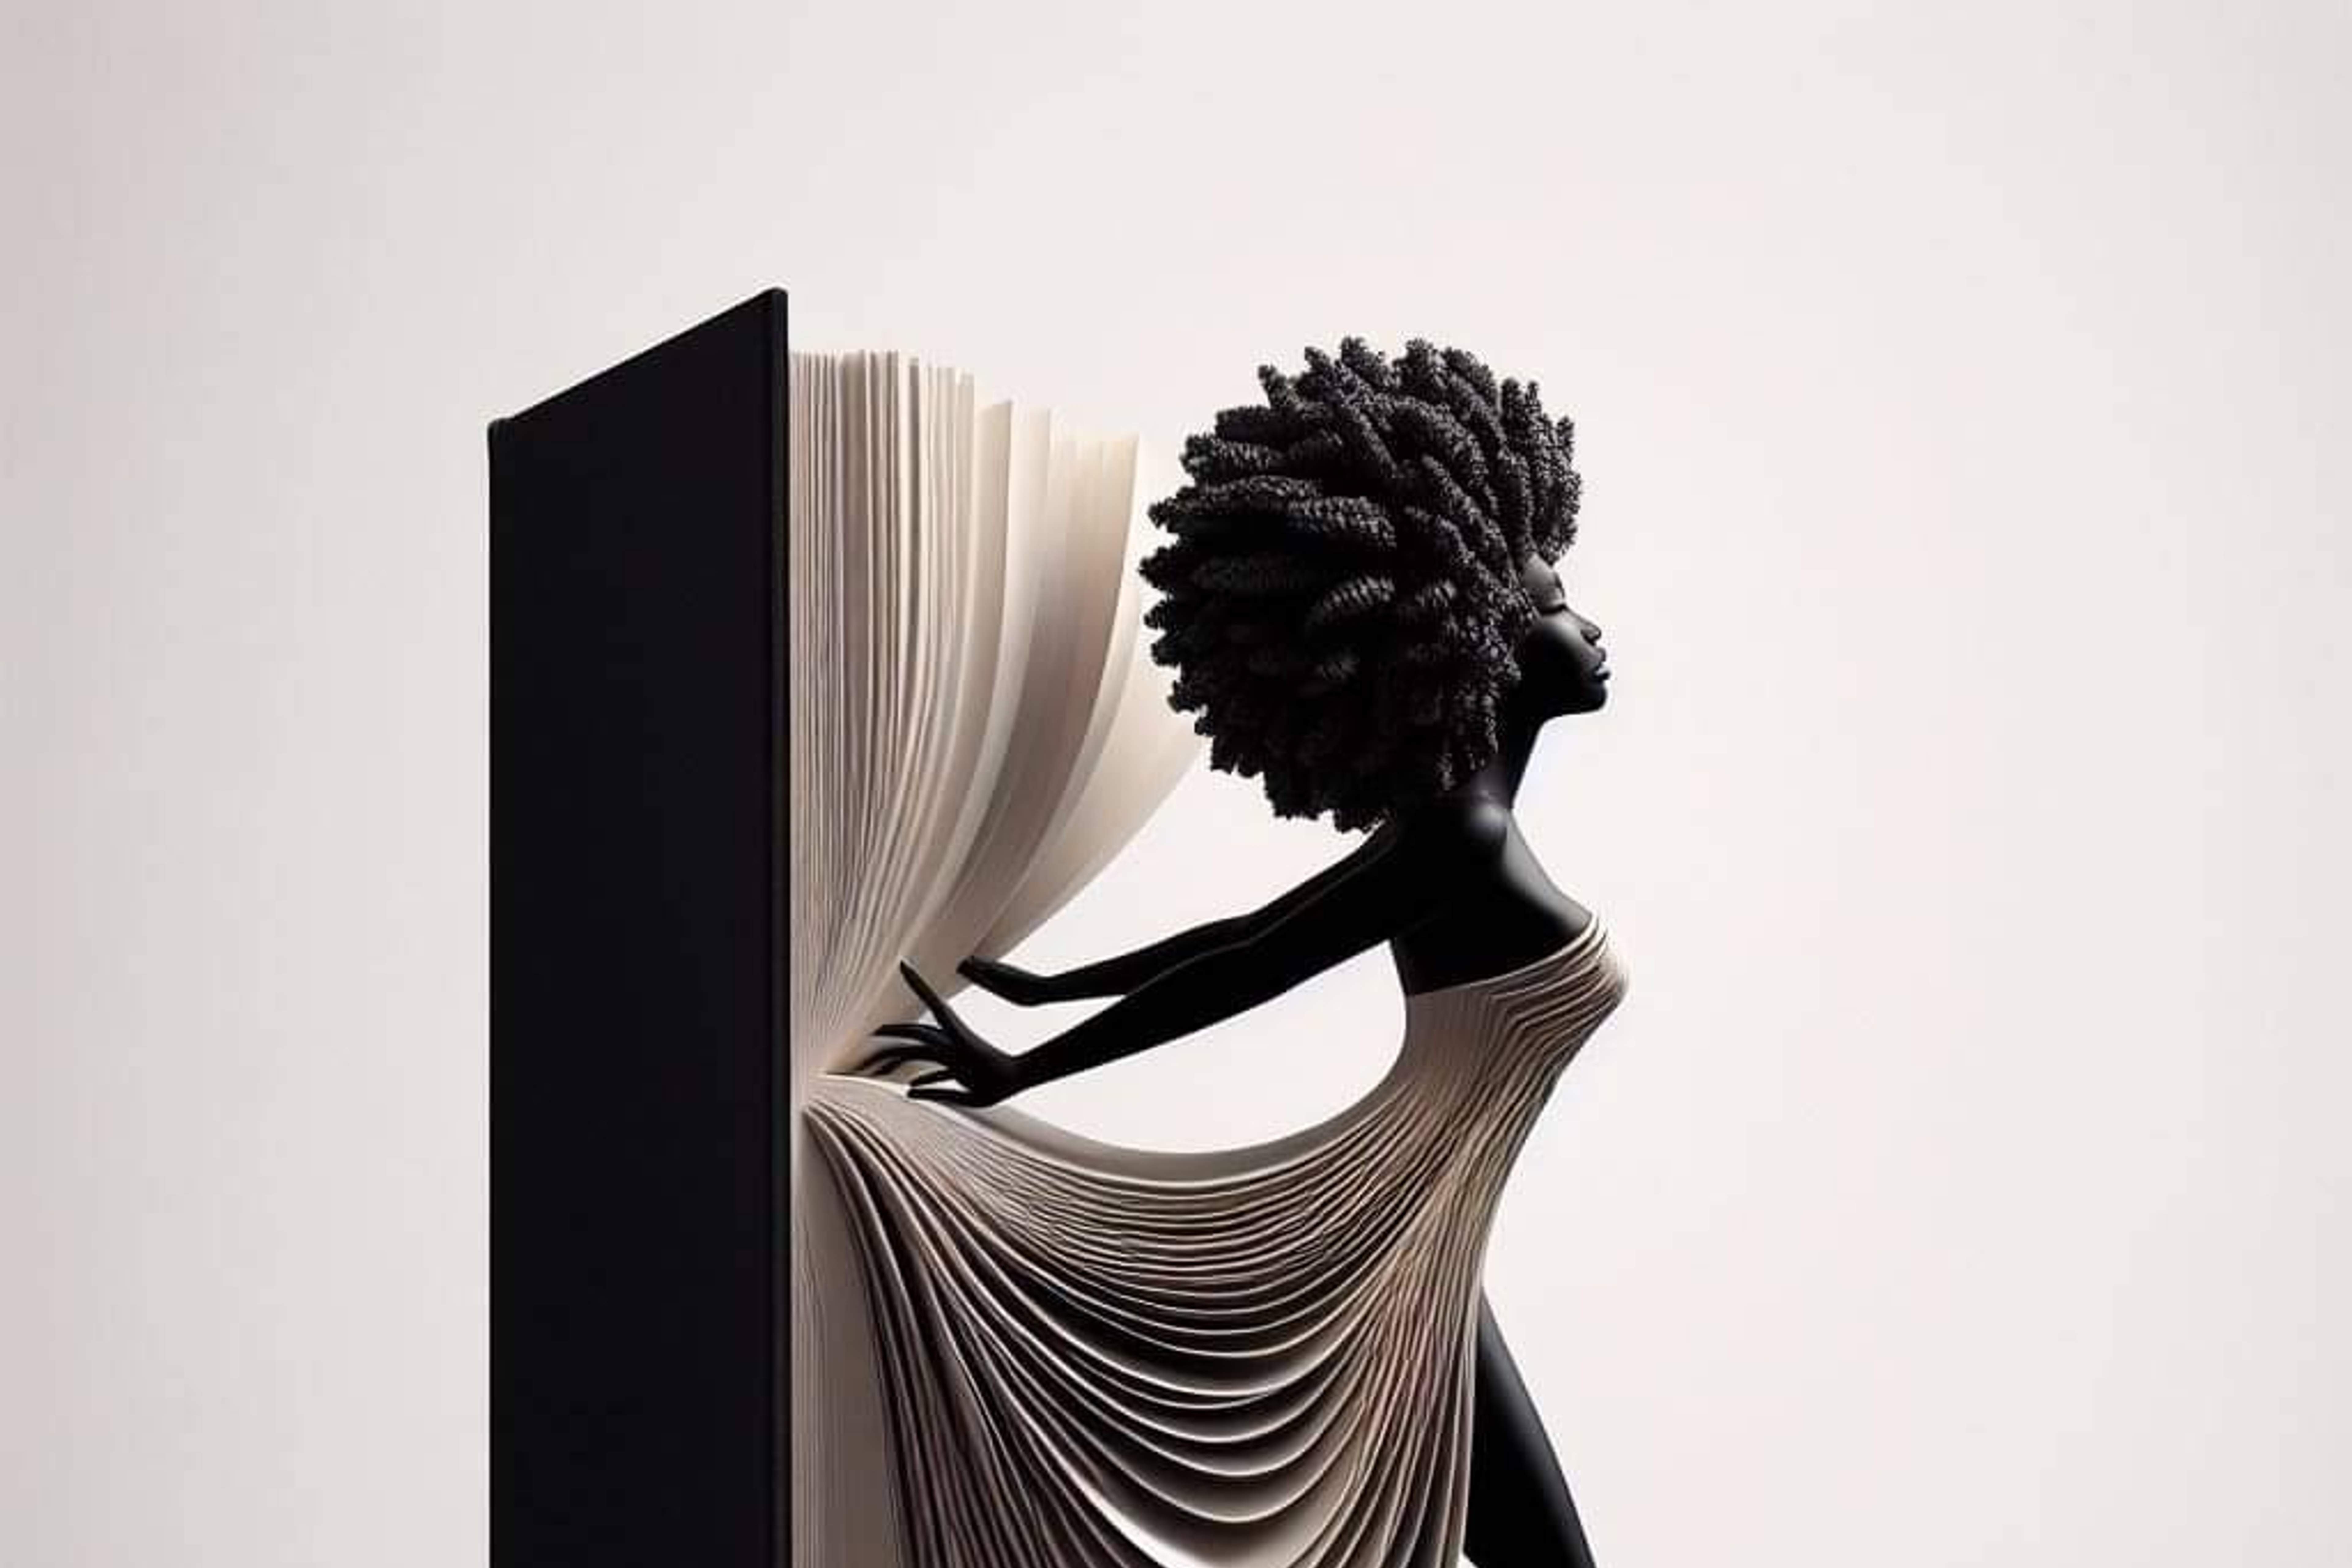 An artistic rendering of a Black woman emerging from the pages of a book, with the pages draped over her like a luxurious dress